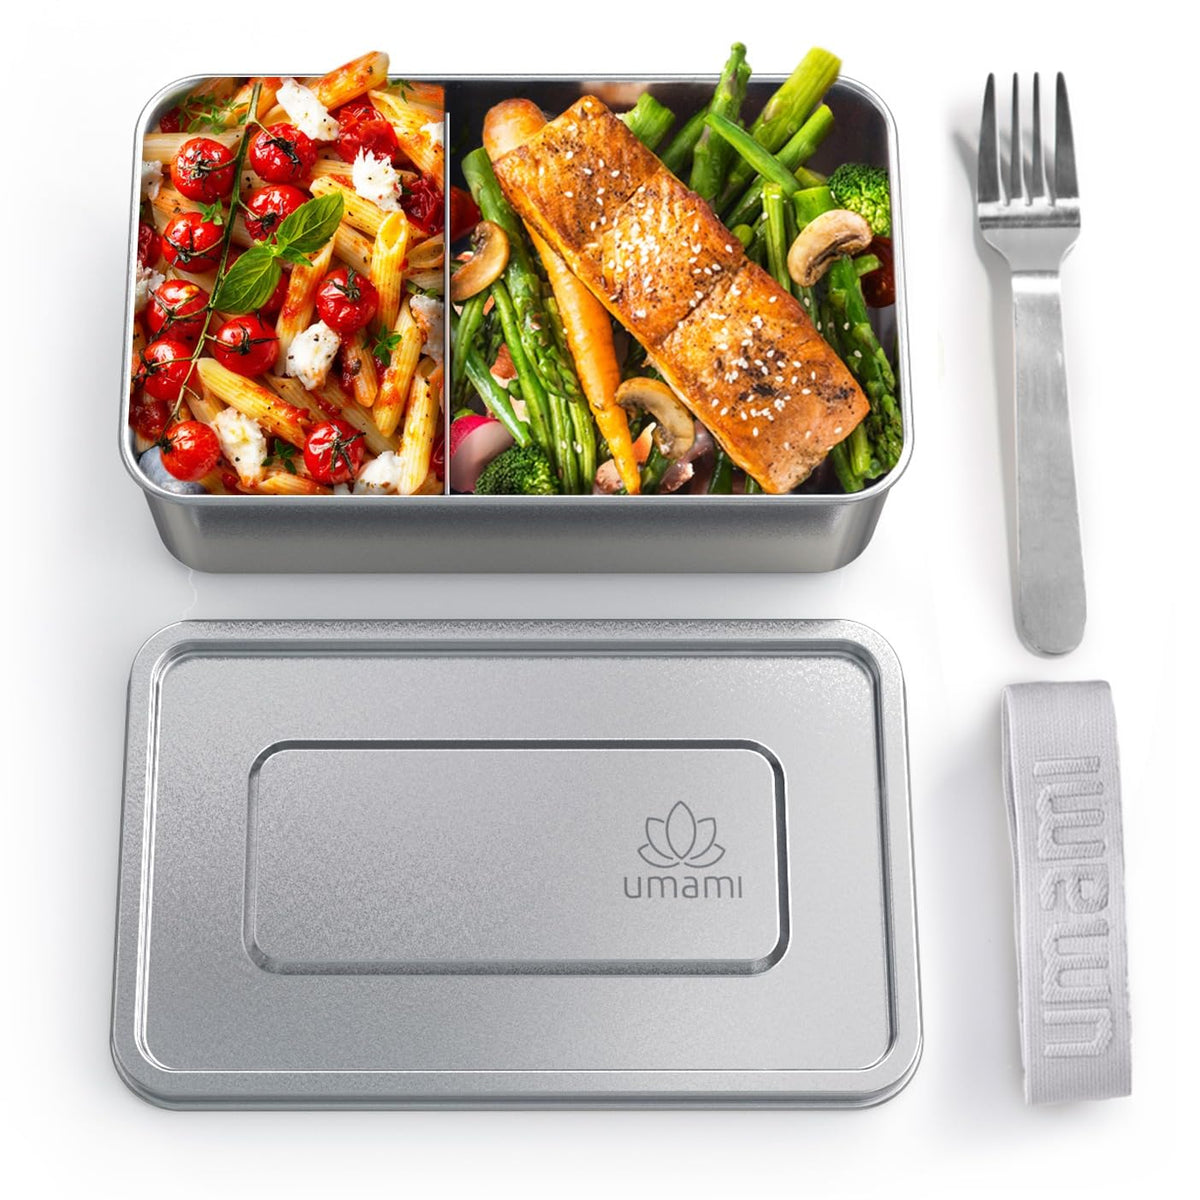 Umami Bento box for adults/children, new 2021 edition, includes 2 sauc –  ZeroShopping